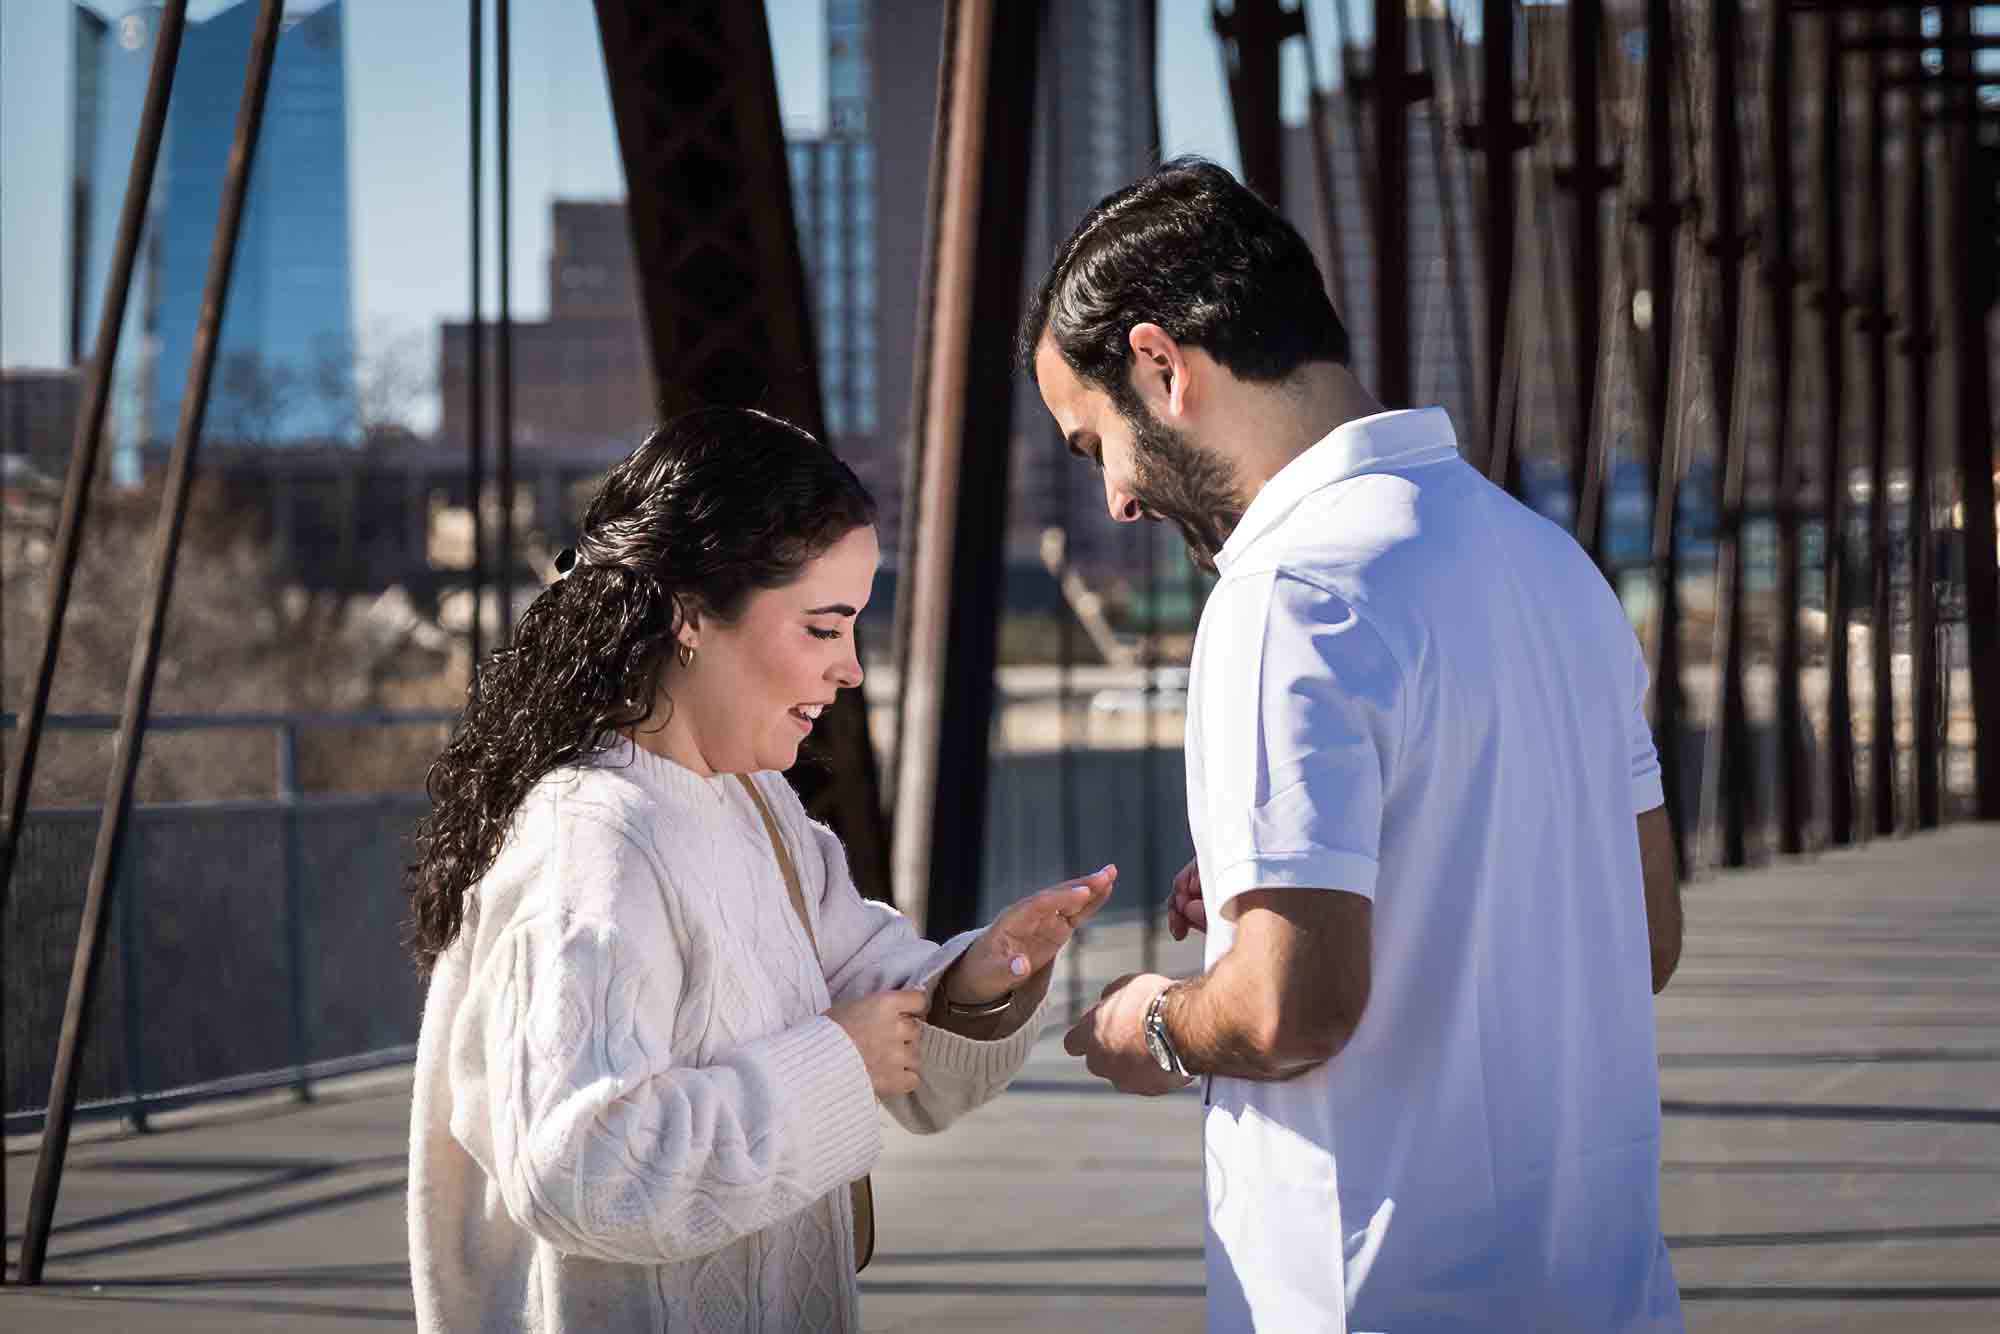 Woman looking at hand with engagement ring in front of man during a Hays Street Bridge proposal